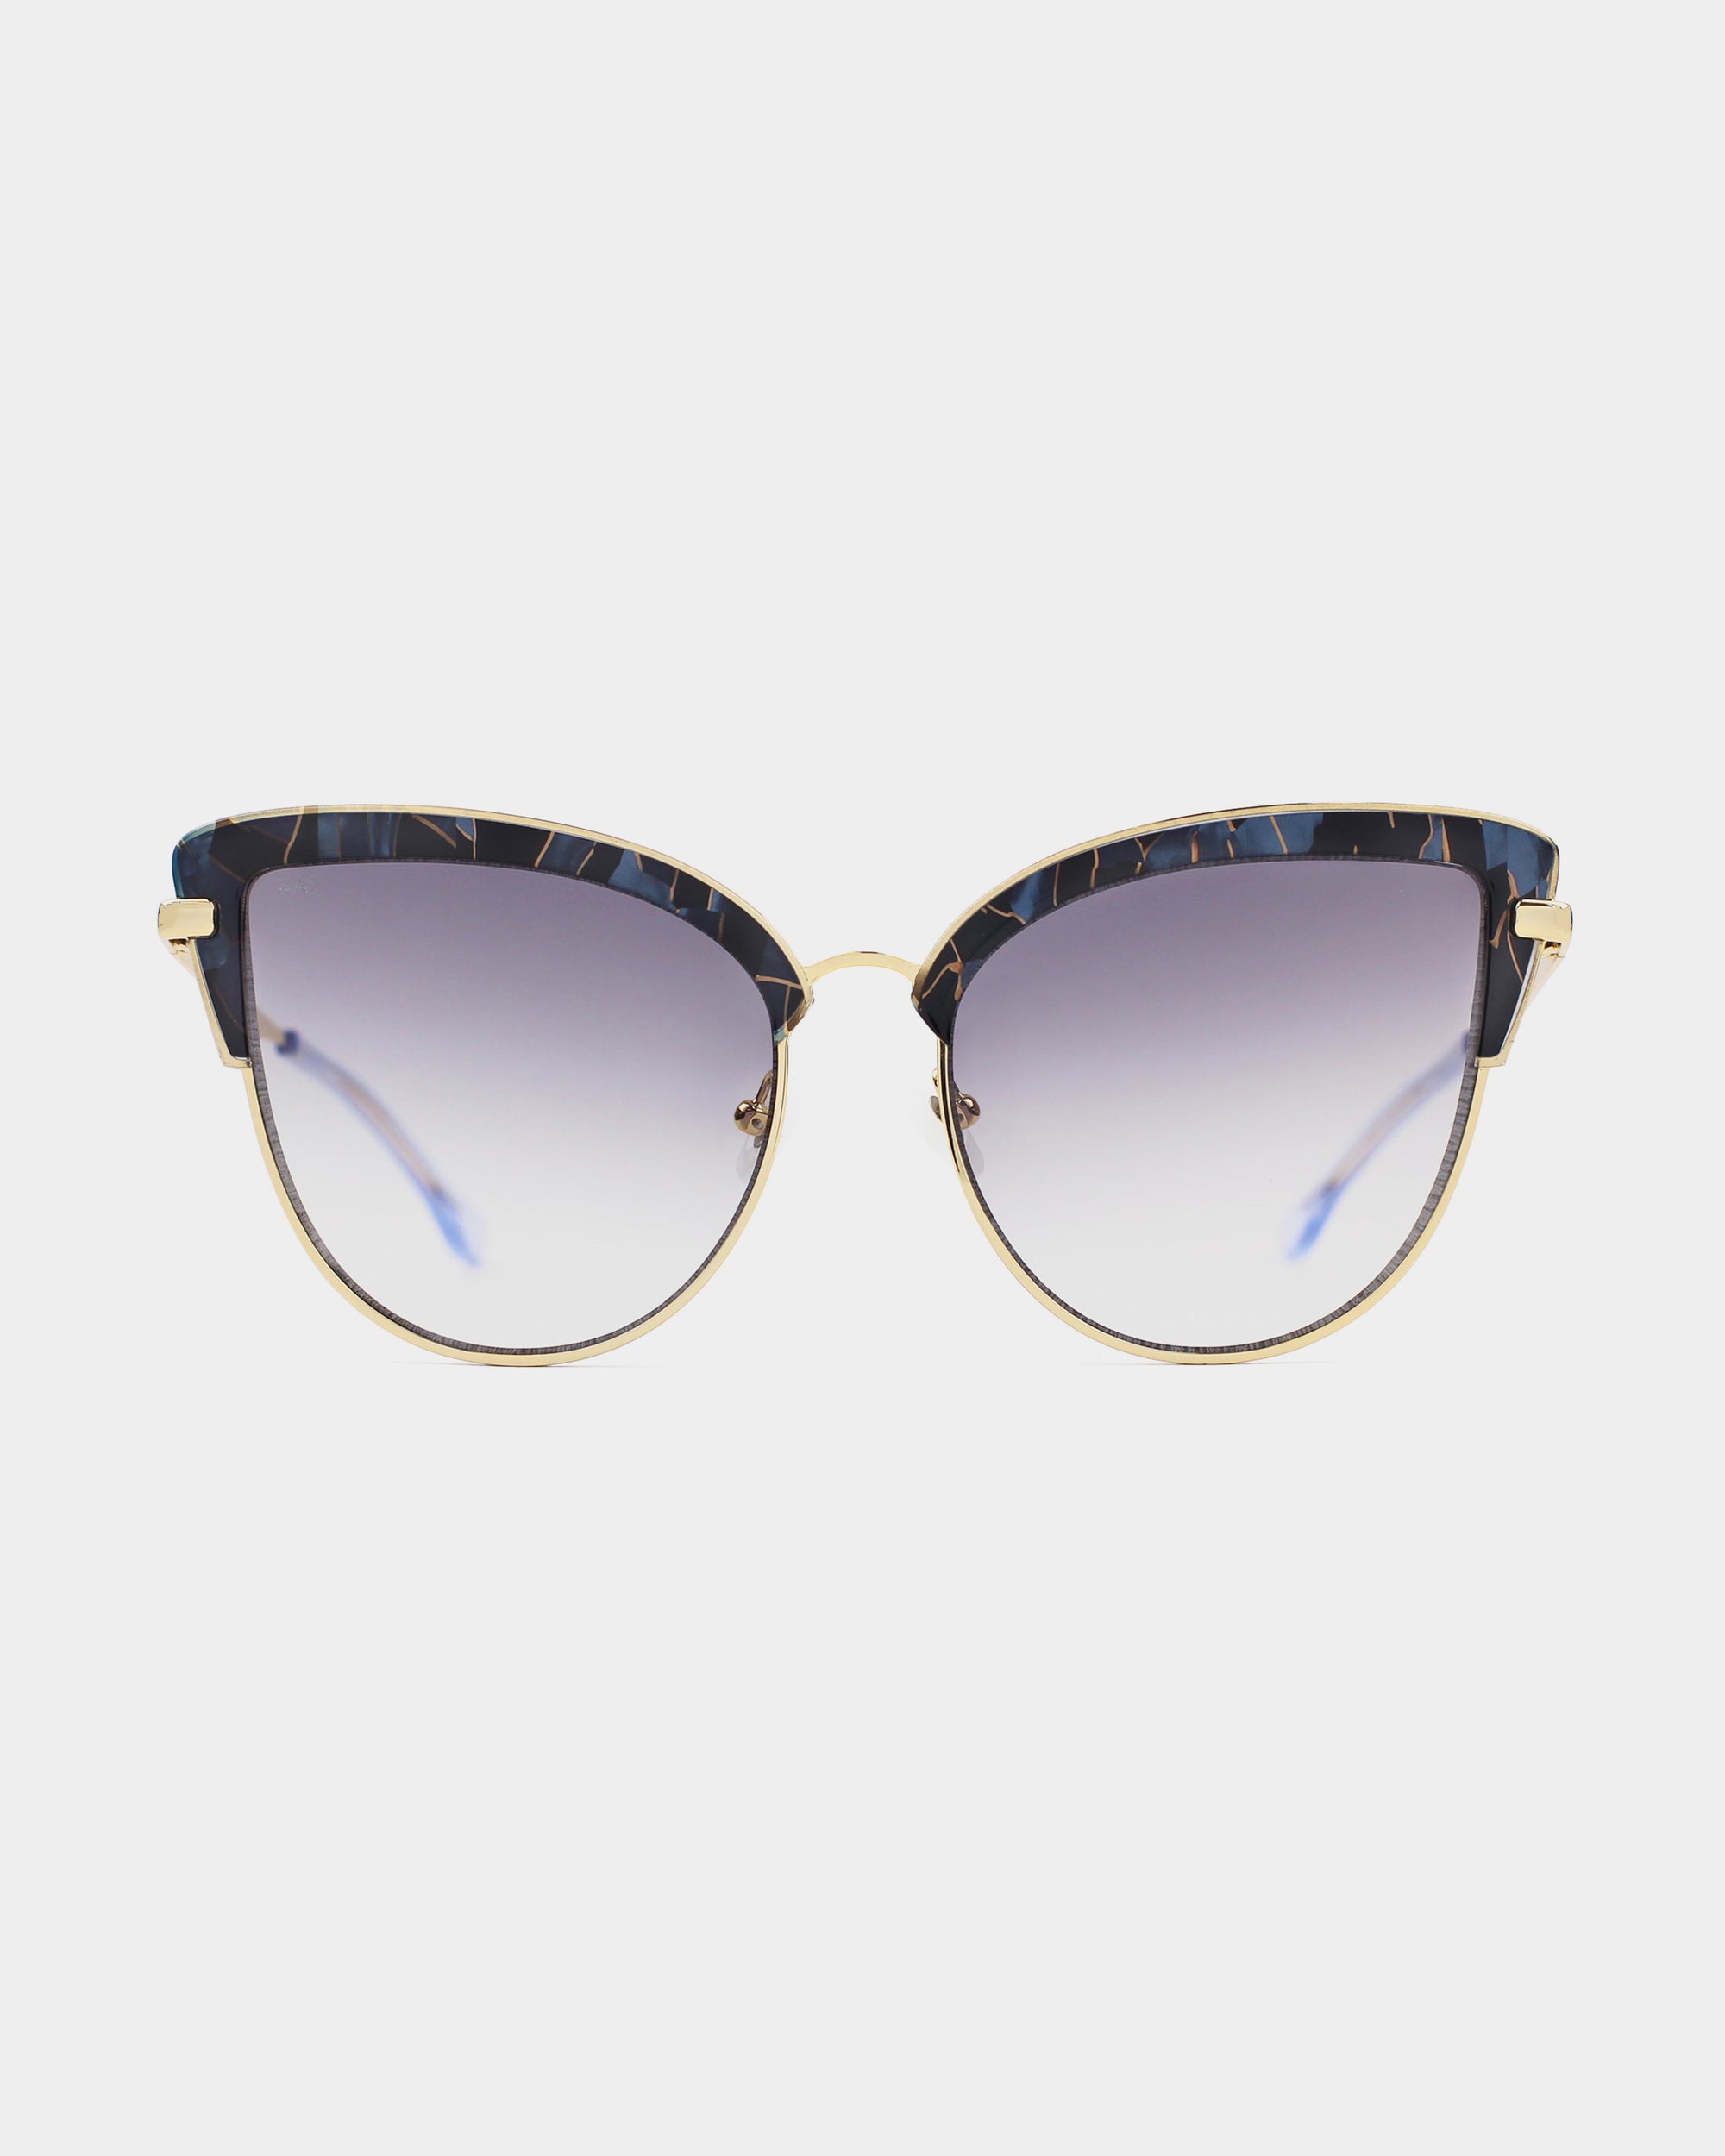 A pair of oversized cat-eye sunglasses with gradient lenses and a sleek design. The stainless steel frames are gold with dark, speckled top rims. The temples are thin and also gold, providing 100% UV protection and giving the Venus sunglasses by For Art's Sake® a stylish and sophisticated look.